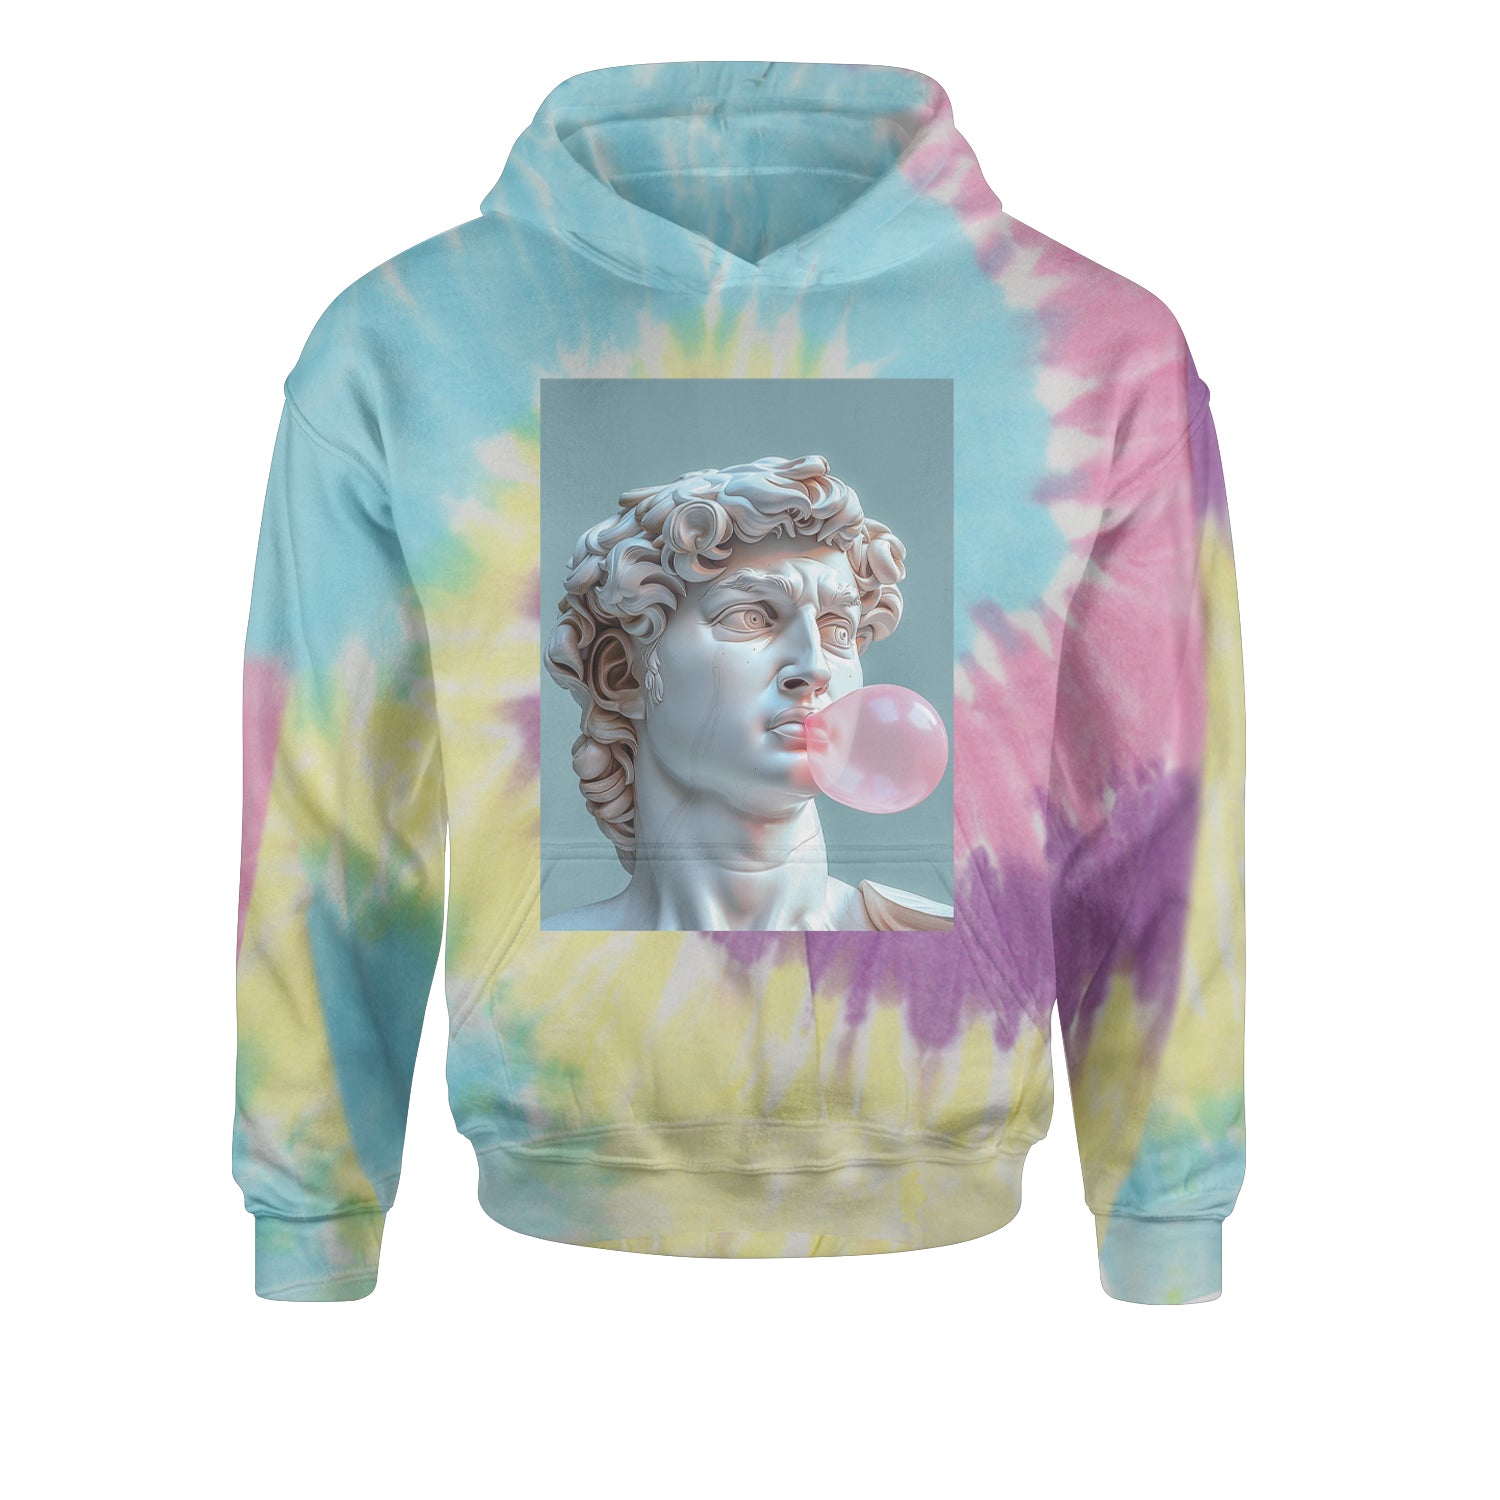 Michelangelo's David with Bubble Gum Contemporary Statue Art Youth-Sized Hoodie Tie-Dye Jelly Bean